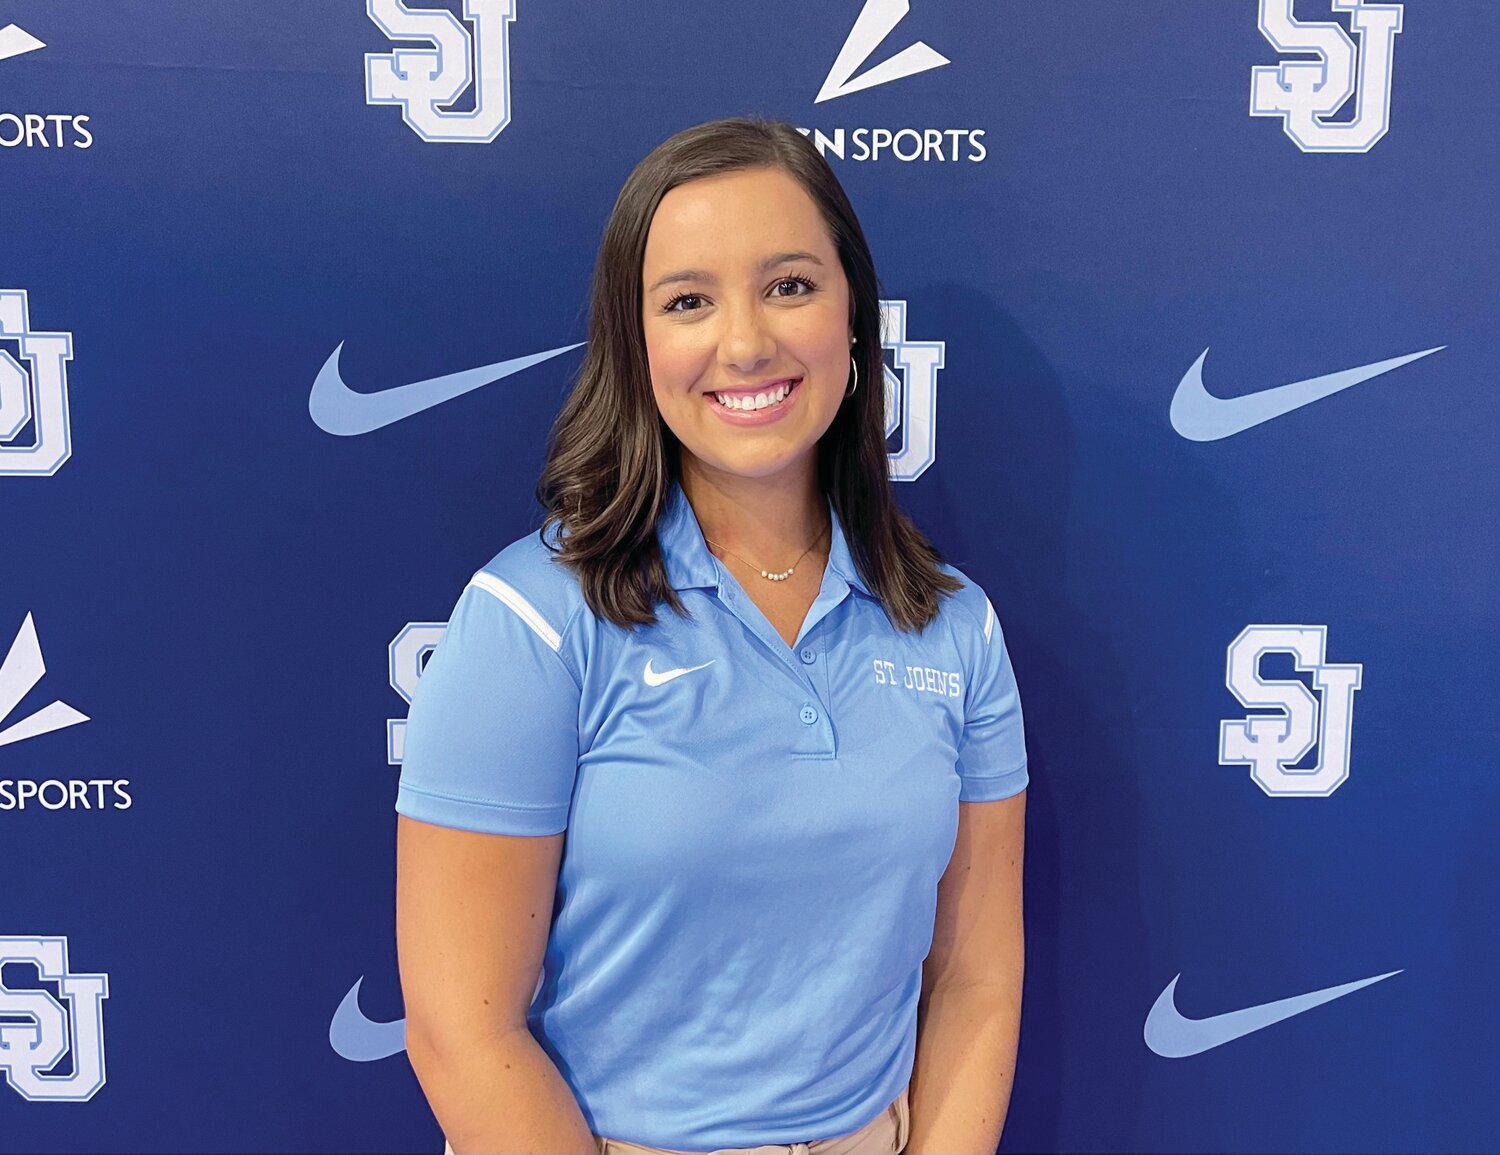 Mindy Herrick, left, was a standout golfer at Buchholz High School and also at the University of North Florida, left, and will be taking over as girls' golf coach at St. Johns Country Day School.